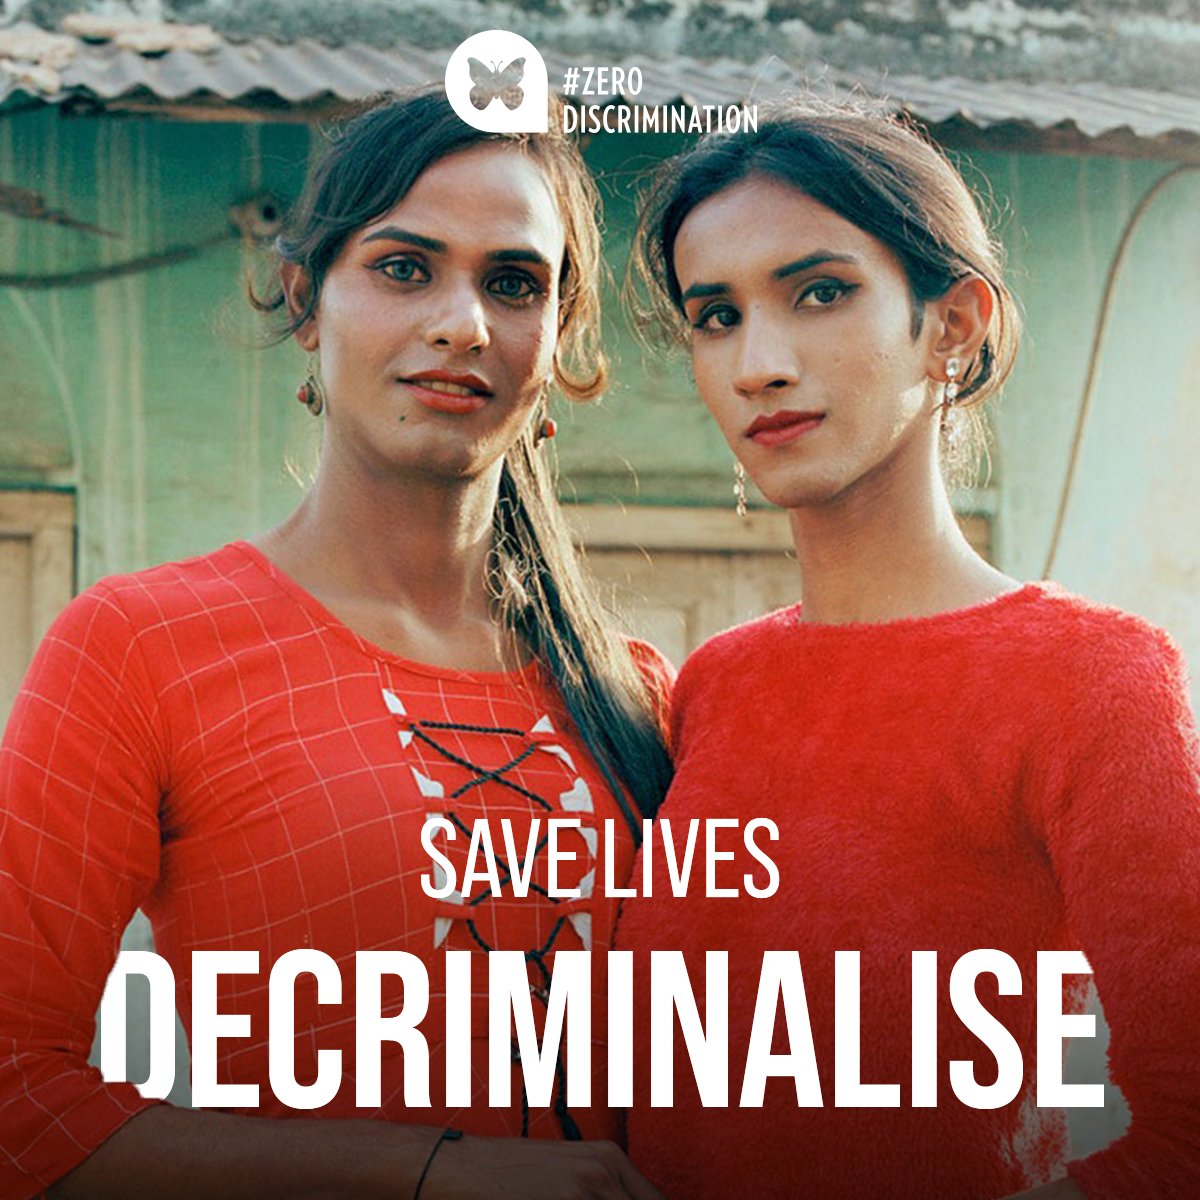 Policies and programmes for women must address women in all their diversity.

Stigma, discrimination & criminalisation mean that women living with HIV, transgender women, women who use drugs & sex workers face multiple barriers accessing HIV services.

Save lives: decriminalise!